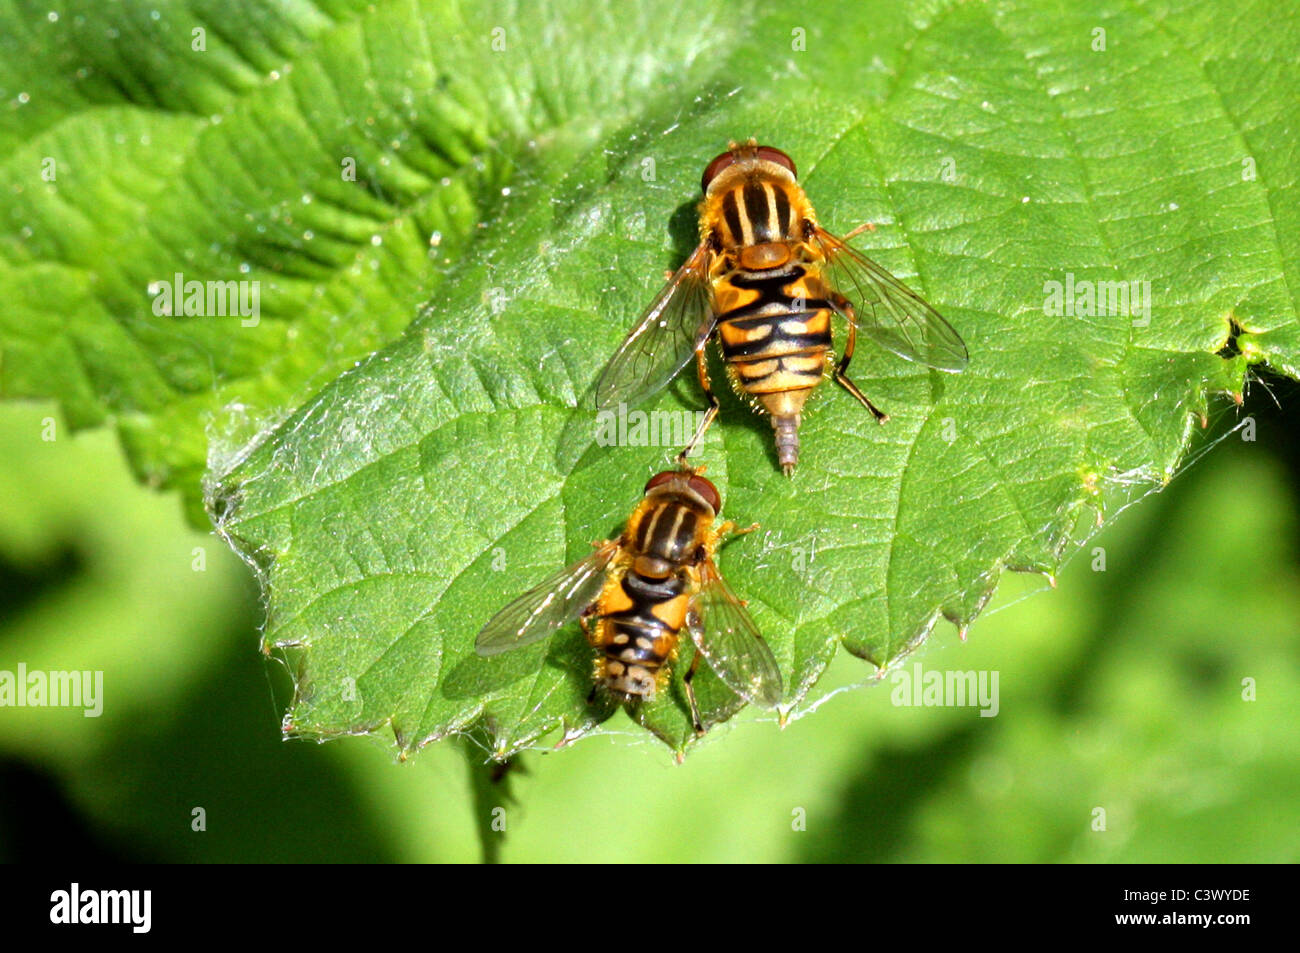 Sun Hoverfly, Brindled Hoverfly or Striped Hoverfly, Helophilus pendulus, Syrphidae, Diptera. Female (top) and Male (below). Stock Photo